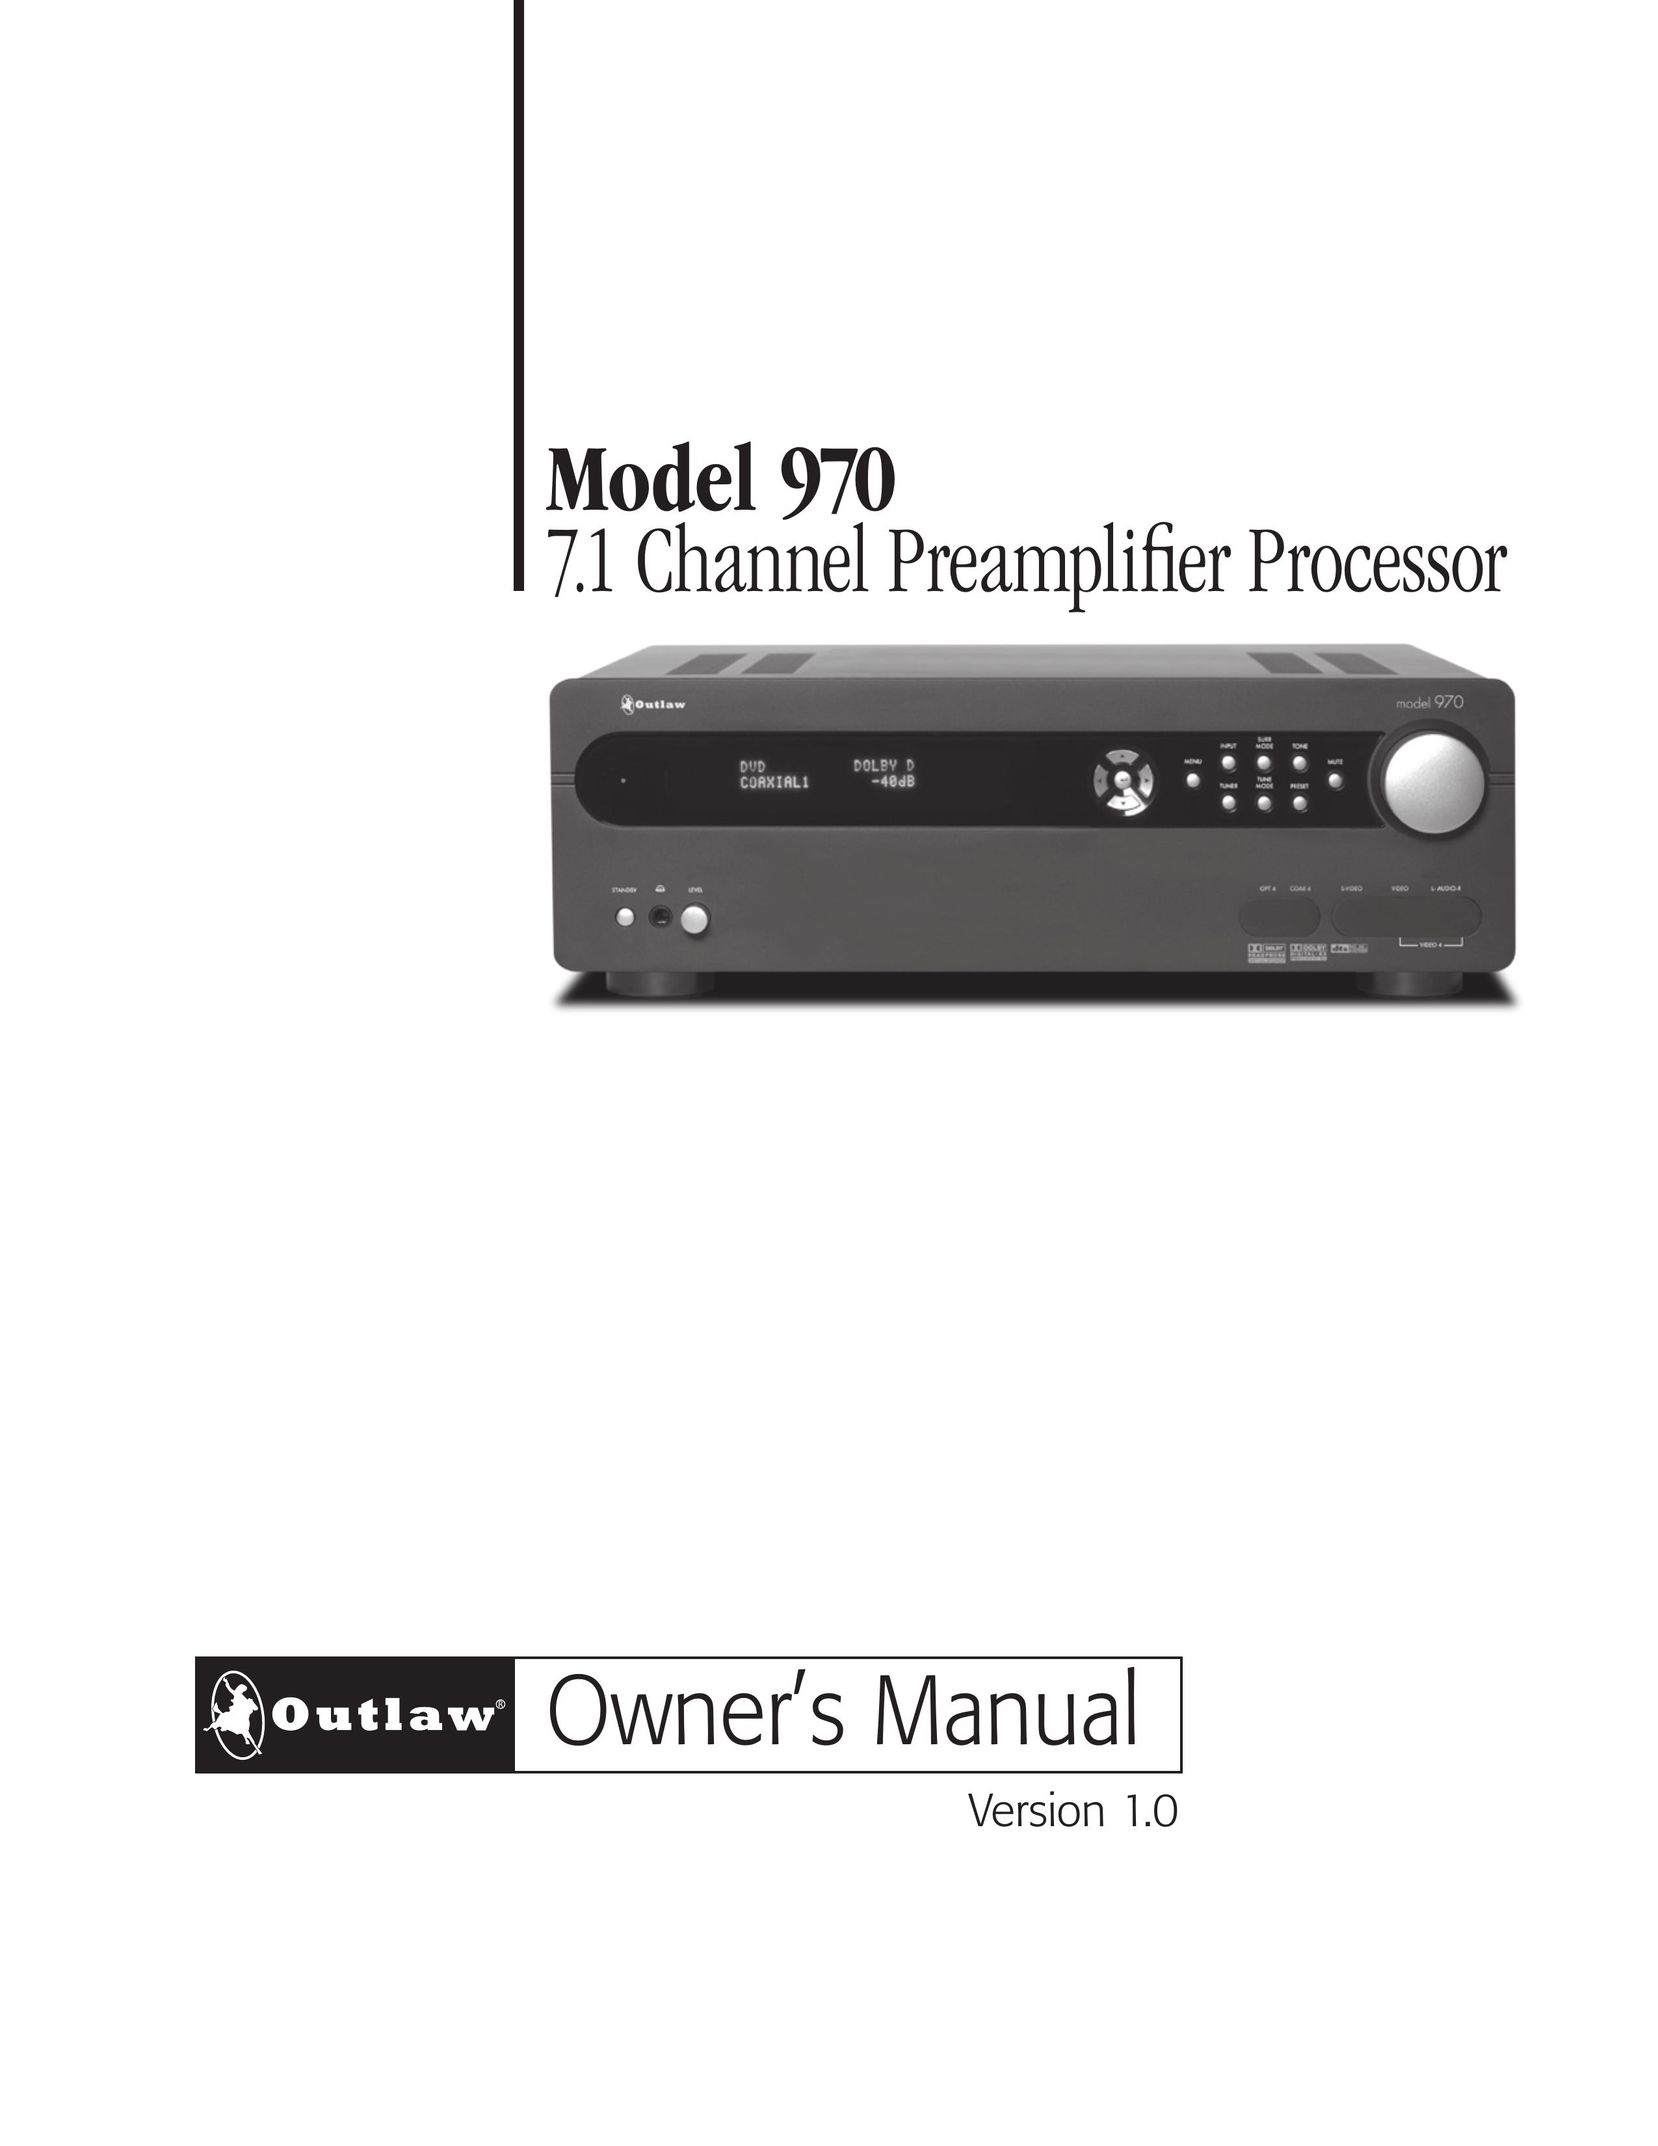 Outlaw Audio 970 Stereo Amplifier User Manual